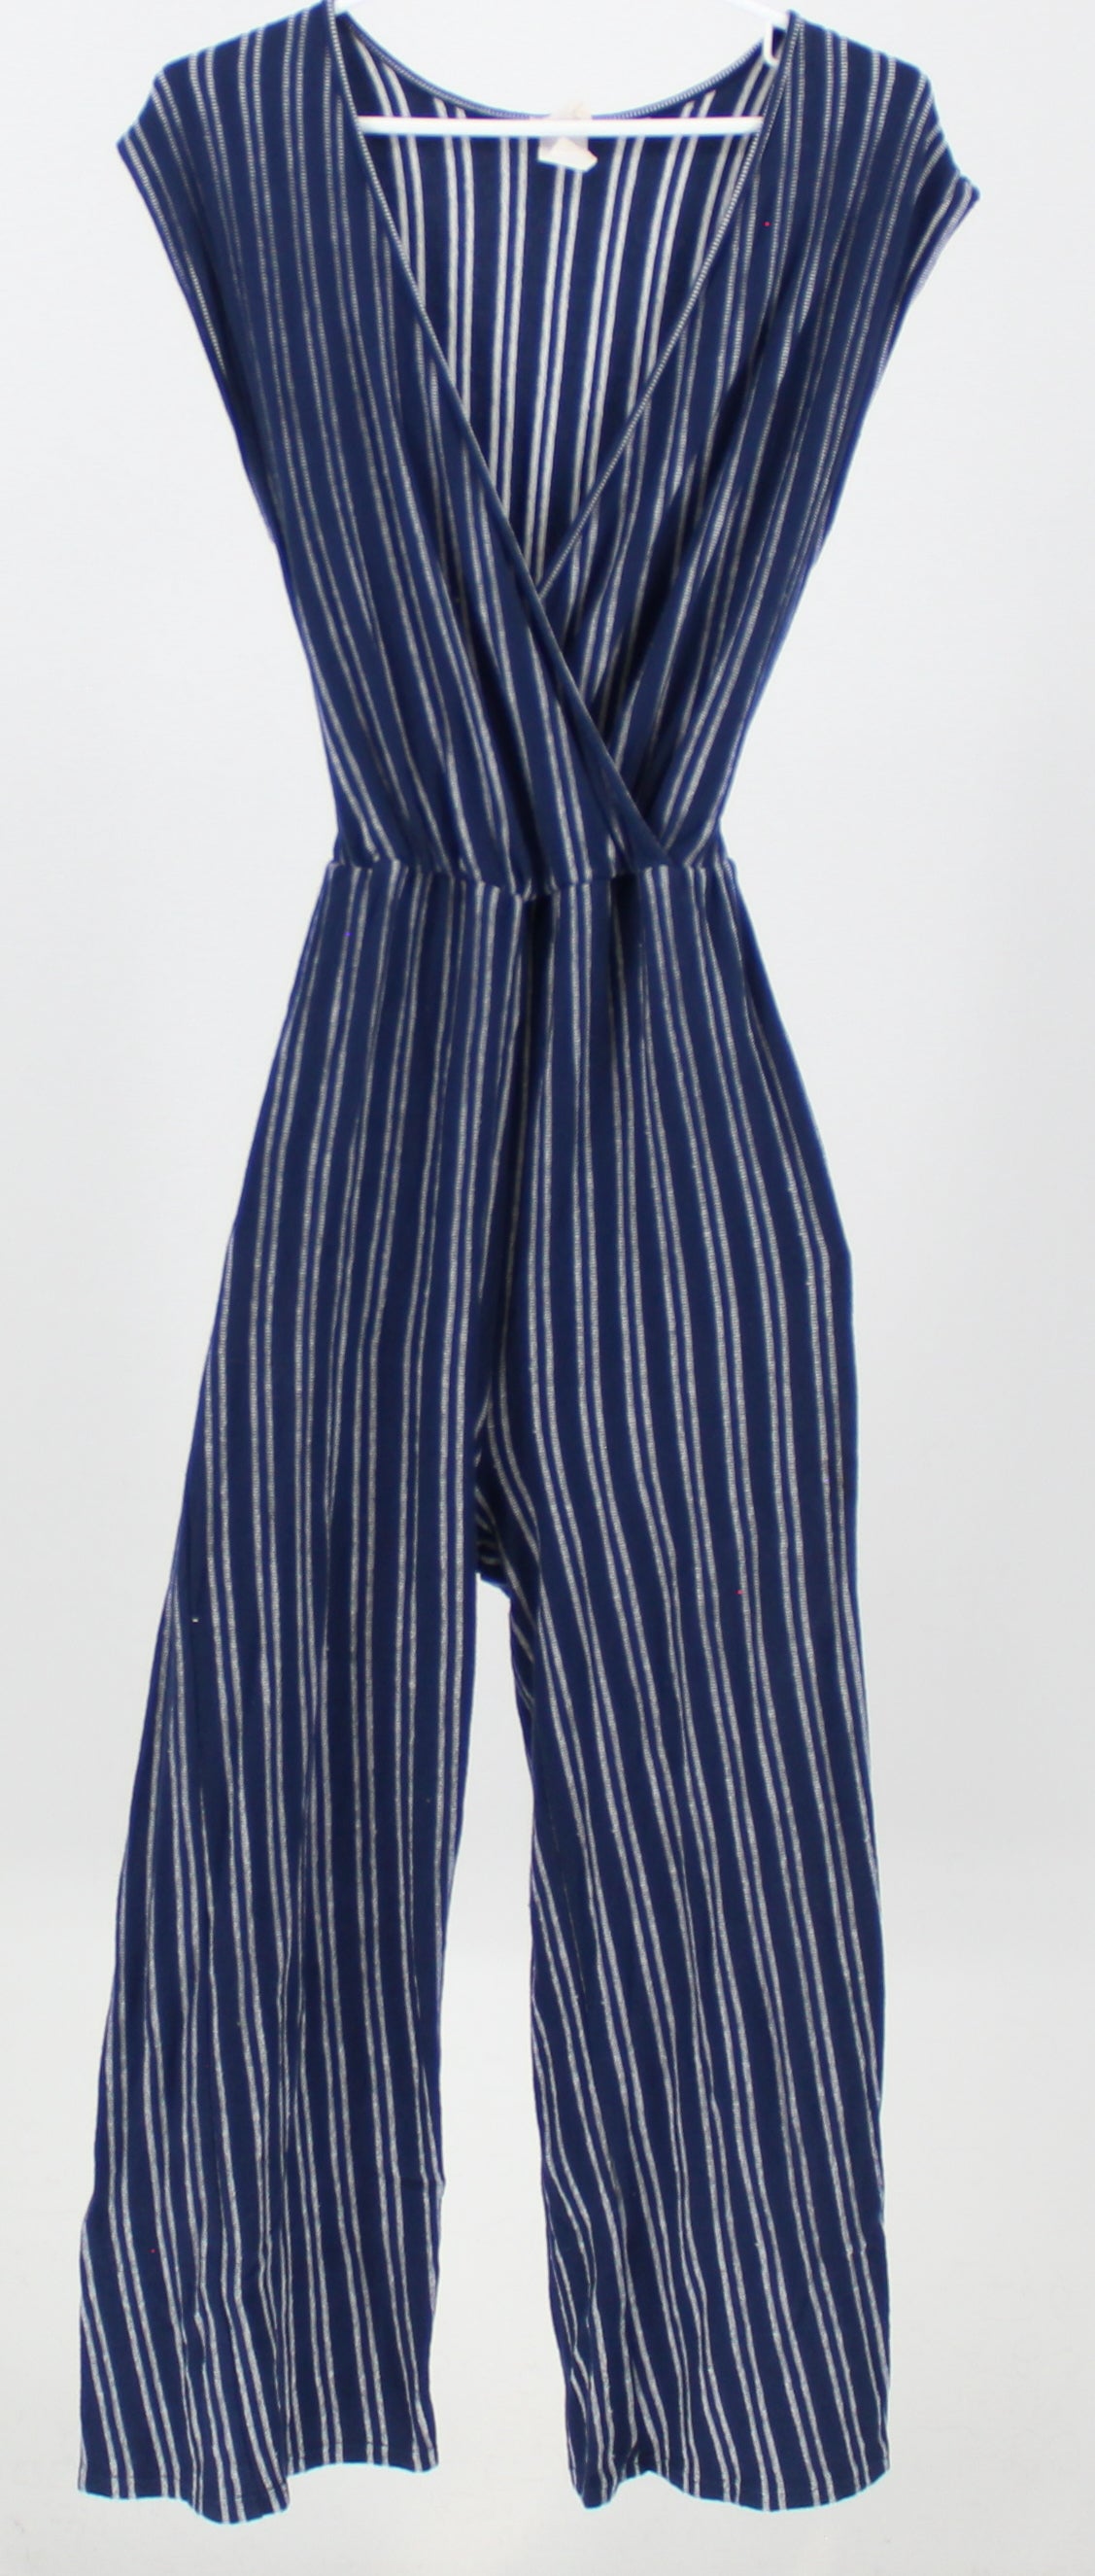 Caution to the wind navy and white striped jumpsuit